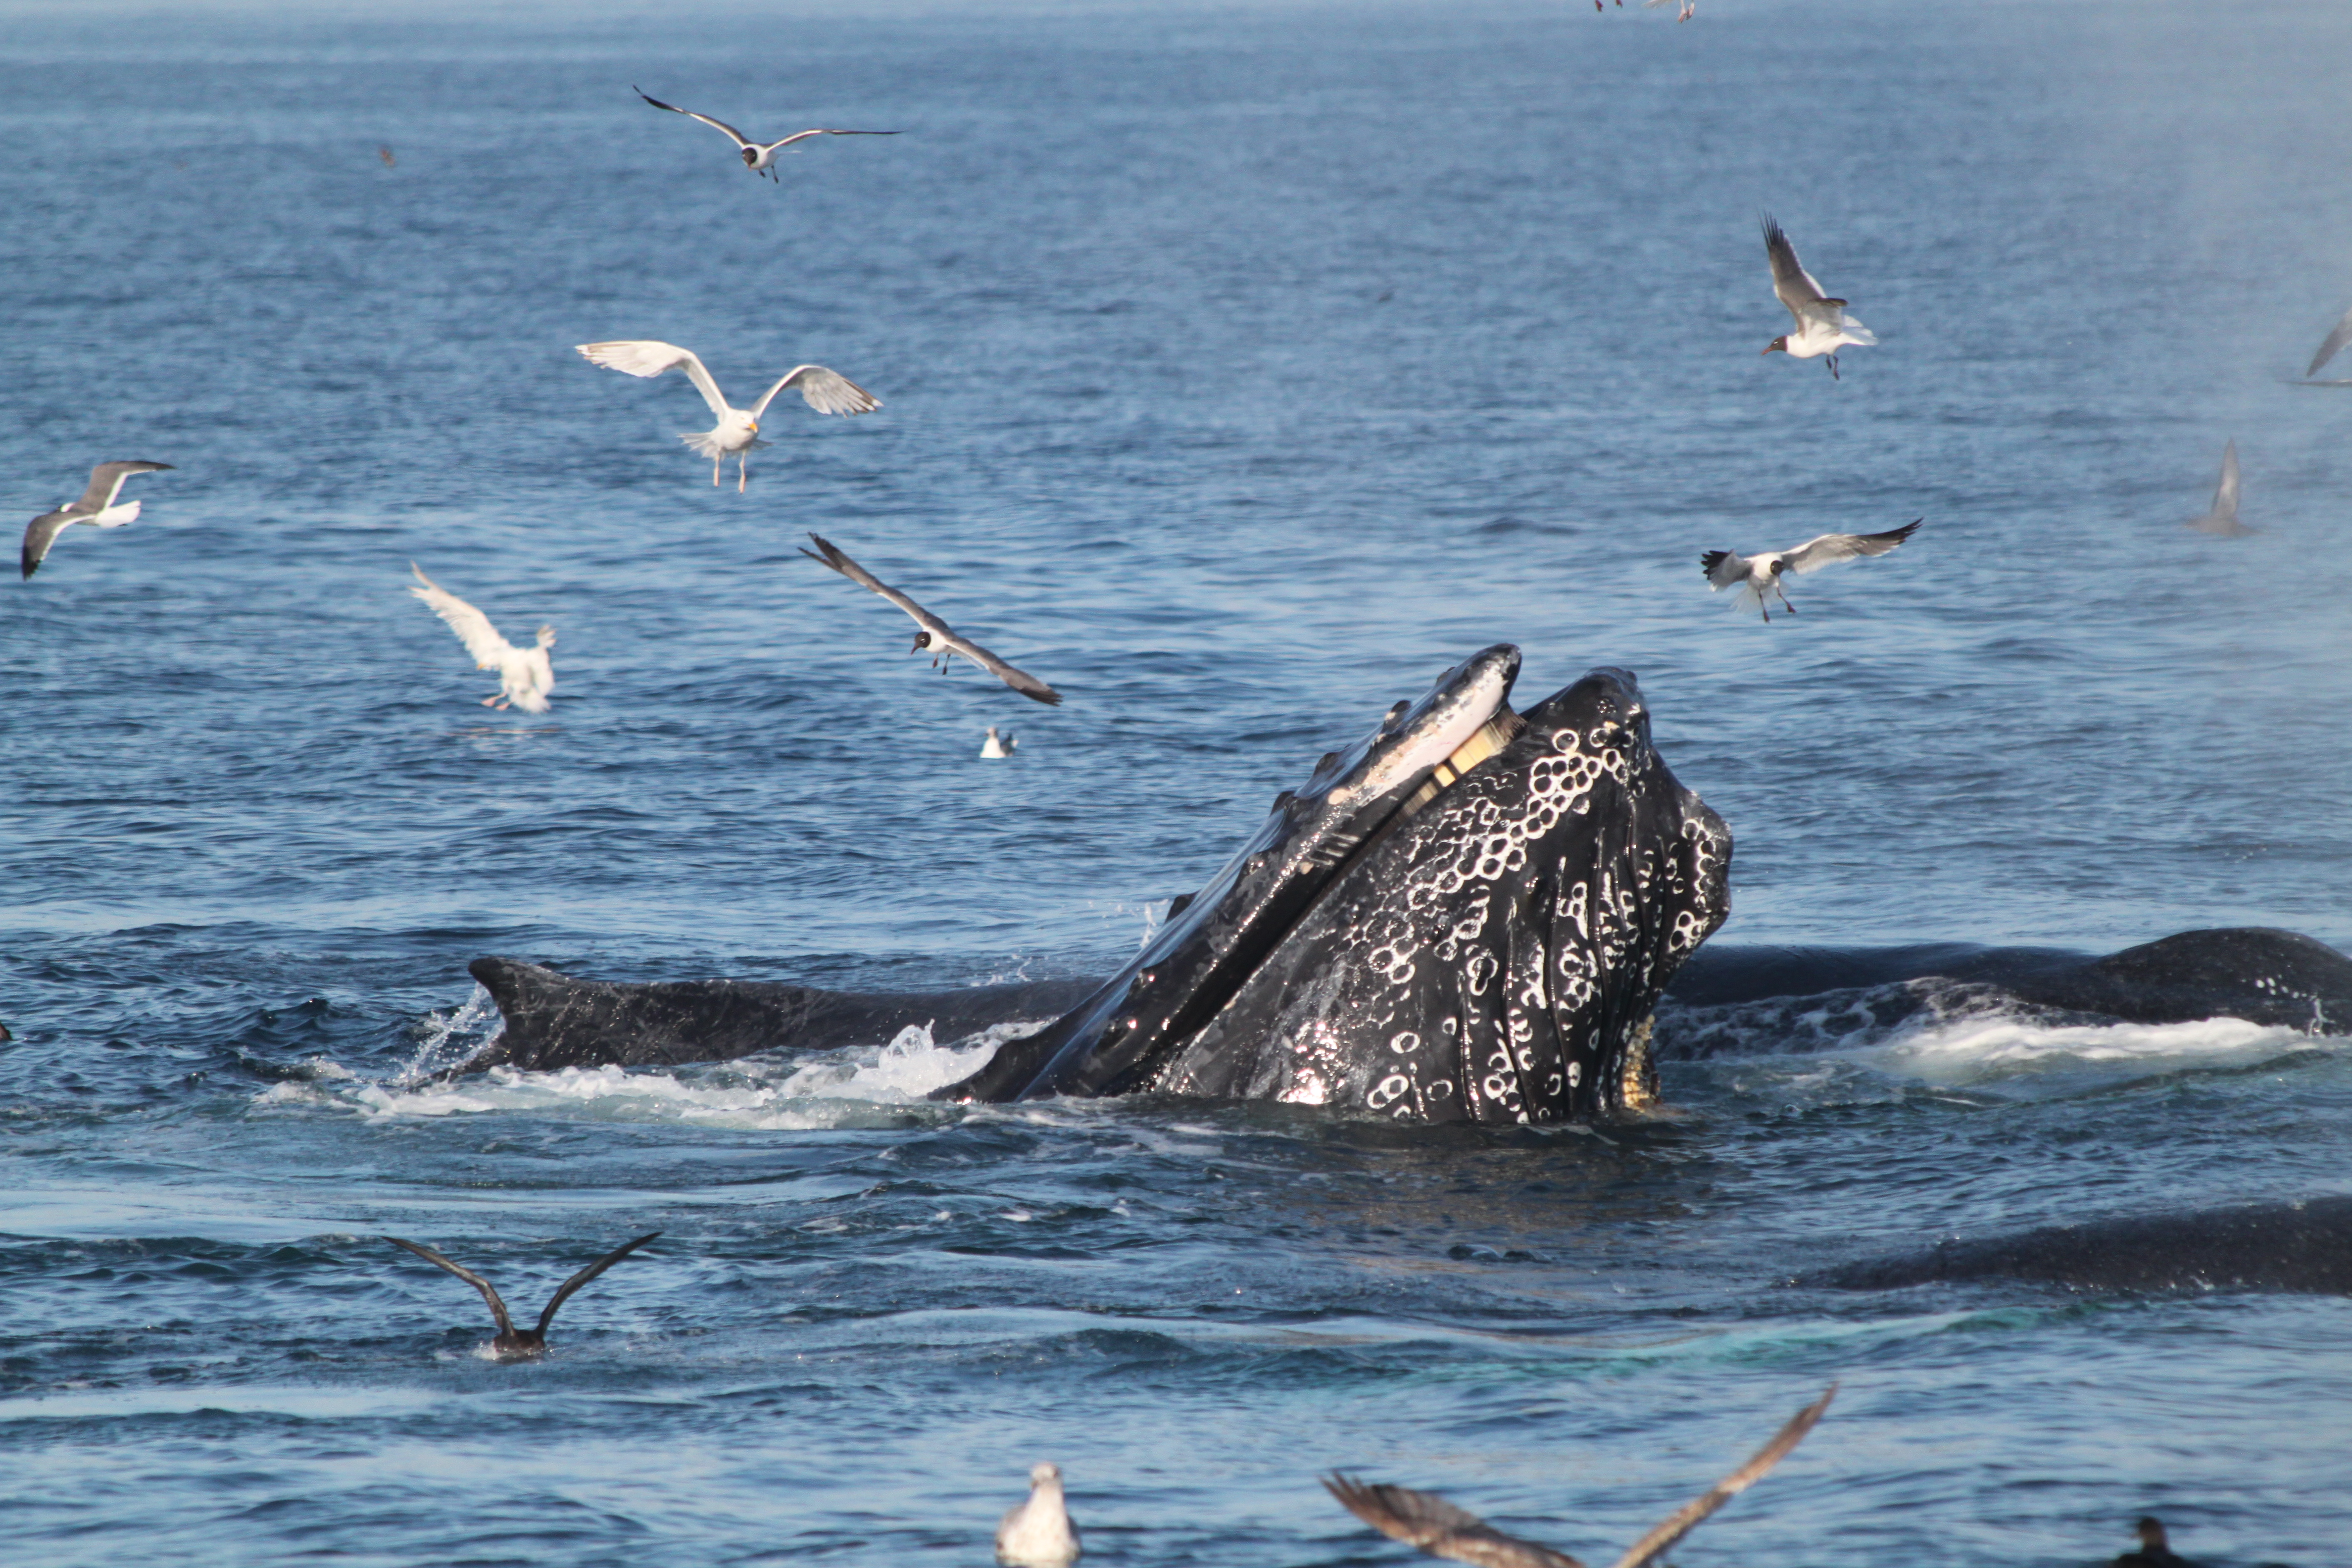 Flock of birds surround three humpback whales frolicking in the water